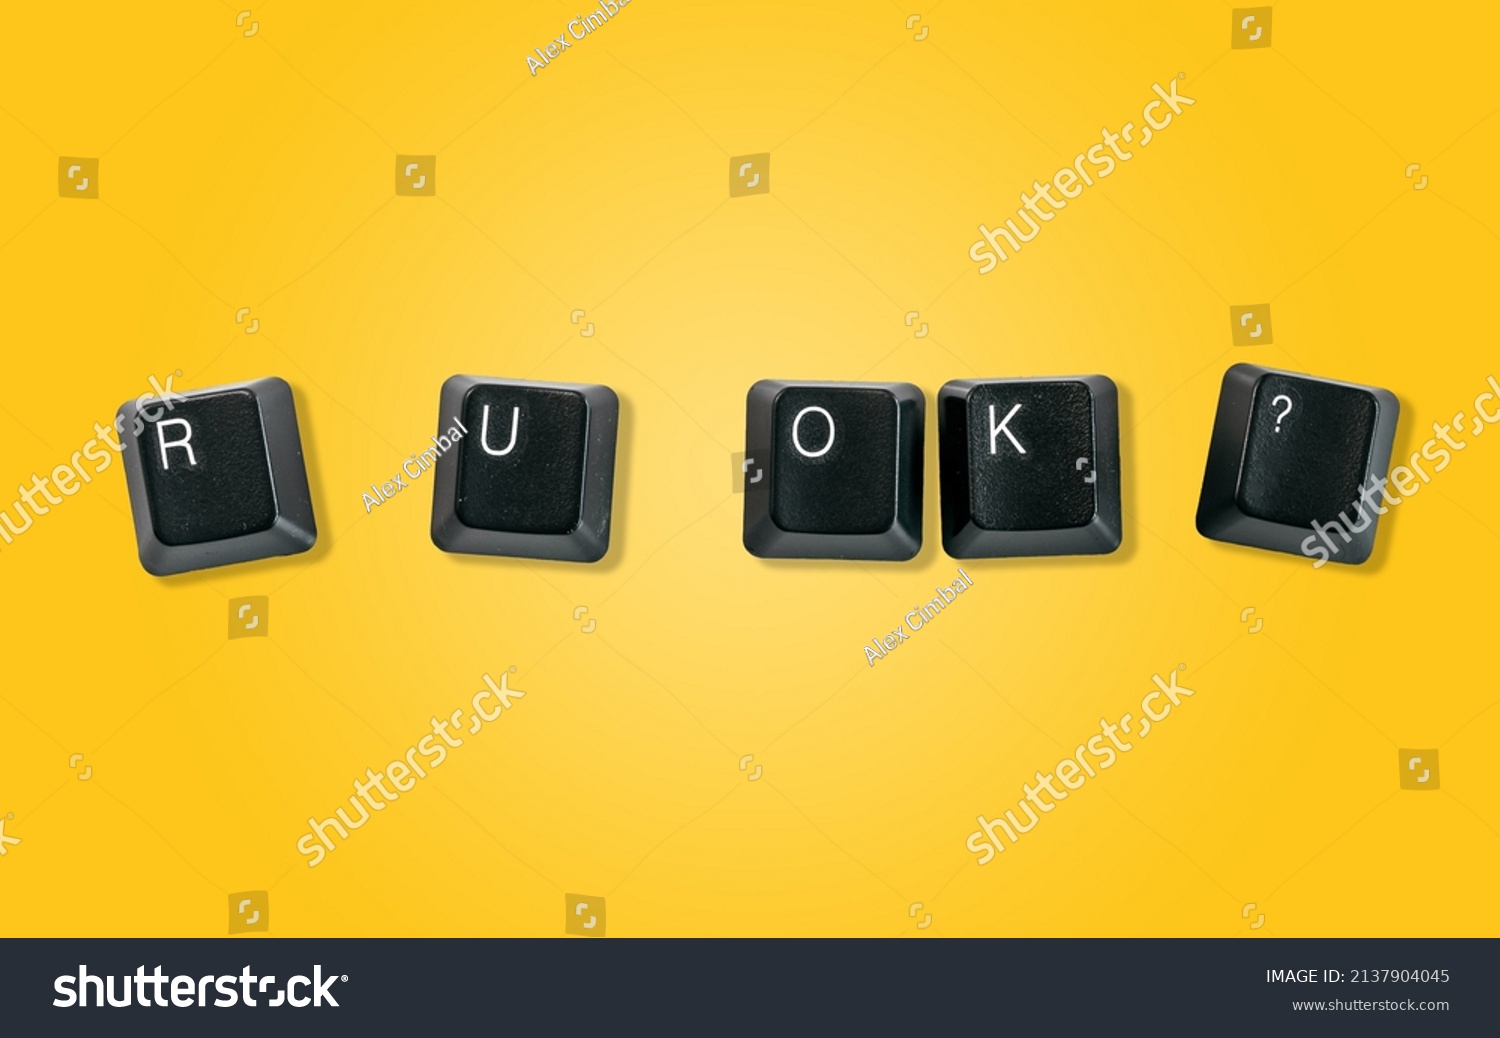 Computer keyboard keys spelling R U OK?, isolated on a yellow background #2137904045